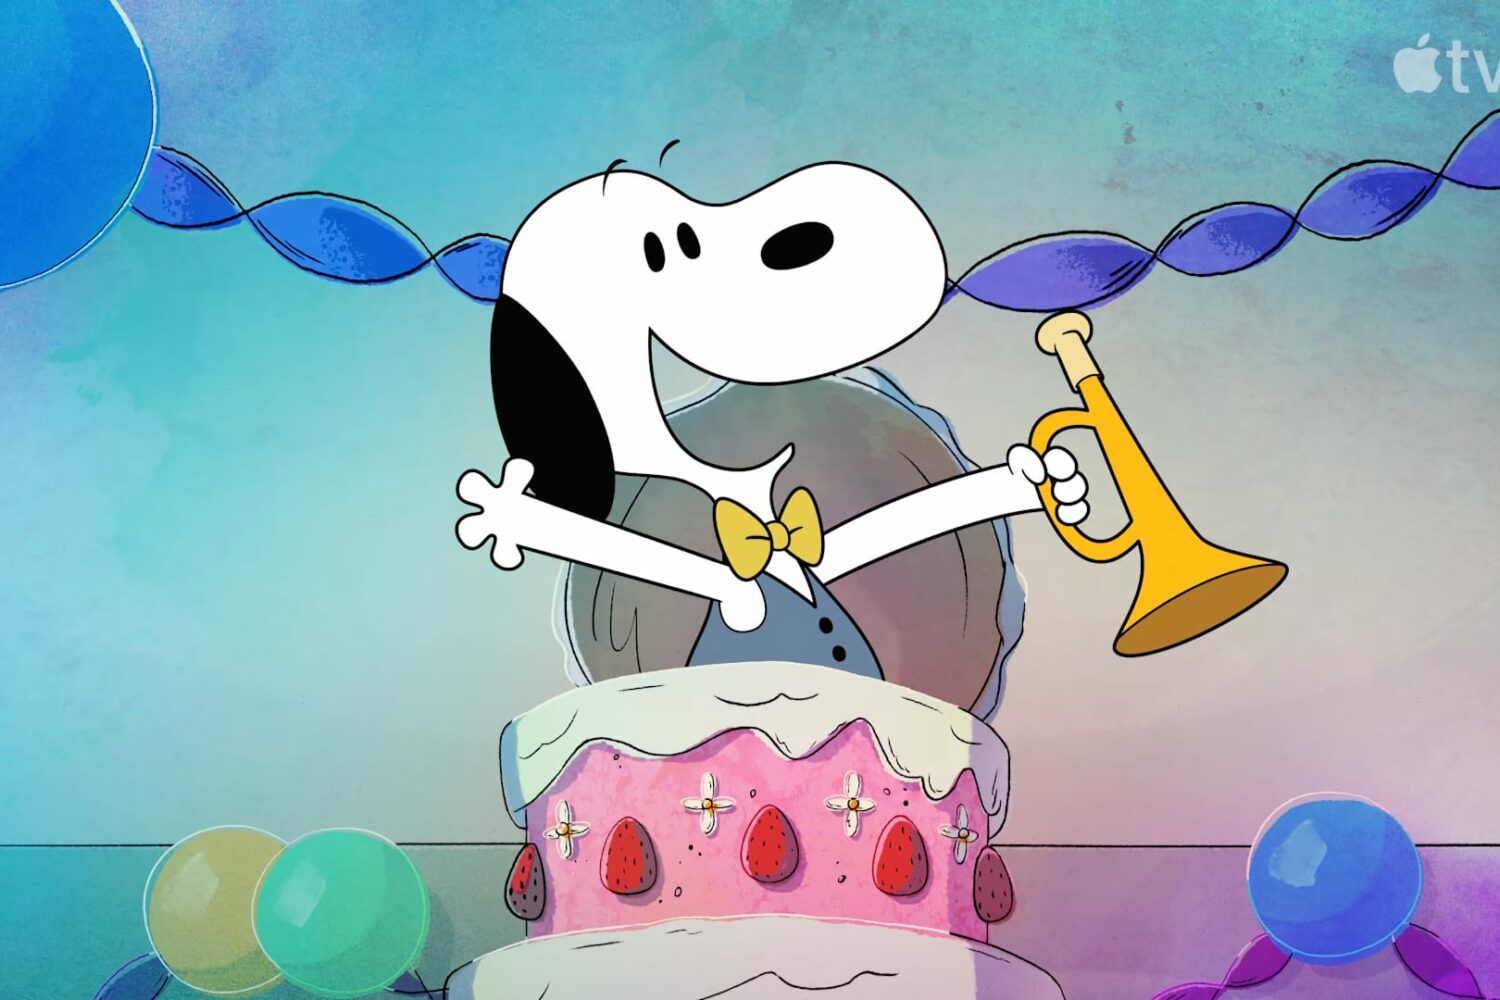 Promotional artwork for the season season of the Apple TV+ animated series “The Snoopy Show”